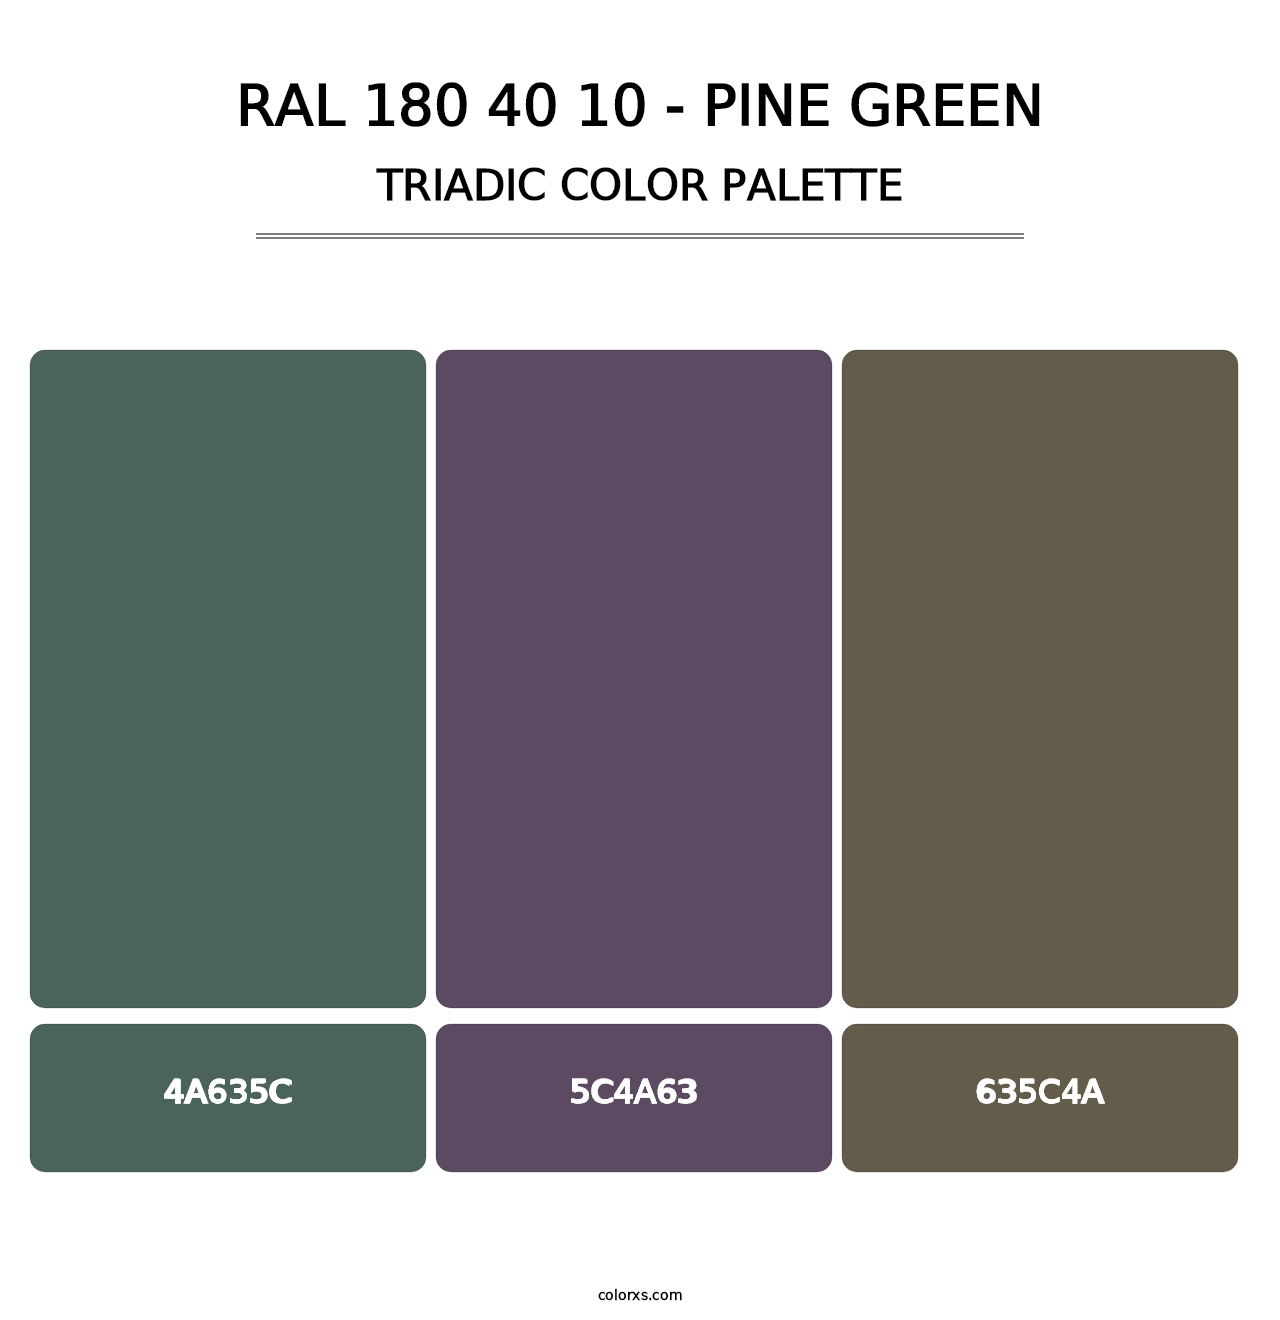 RAL 180 40 10 - Pine Green - Triadic Color Palette